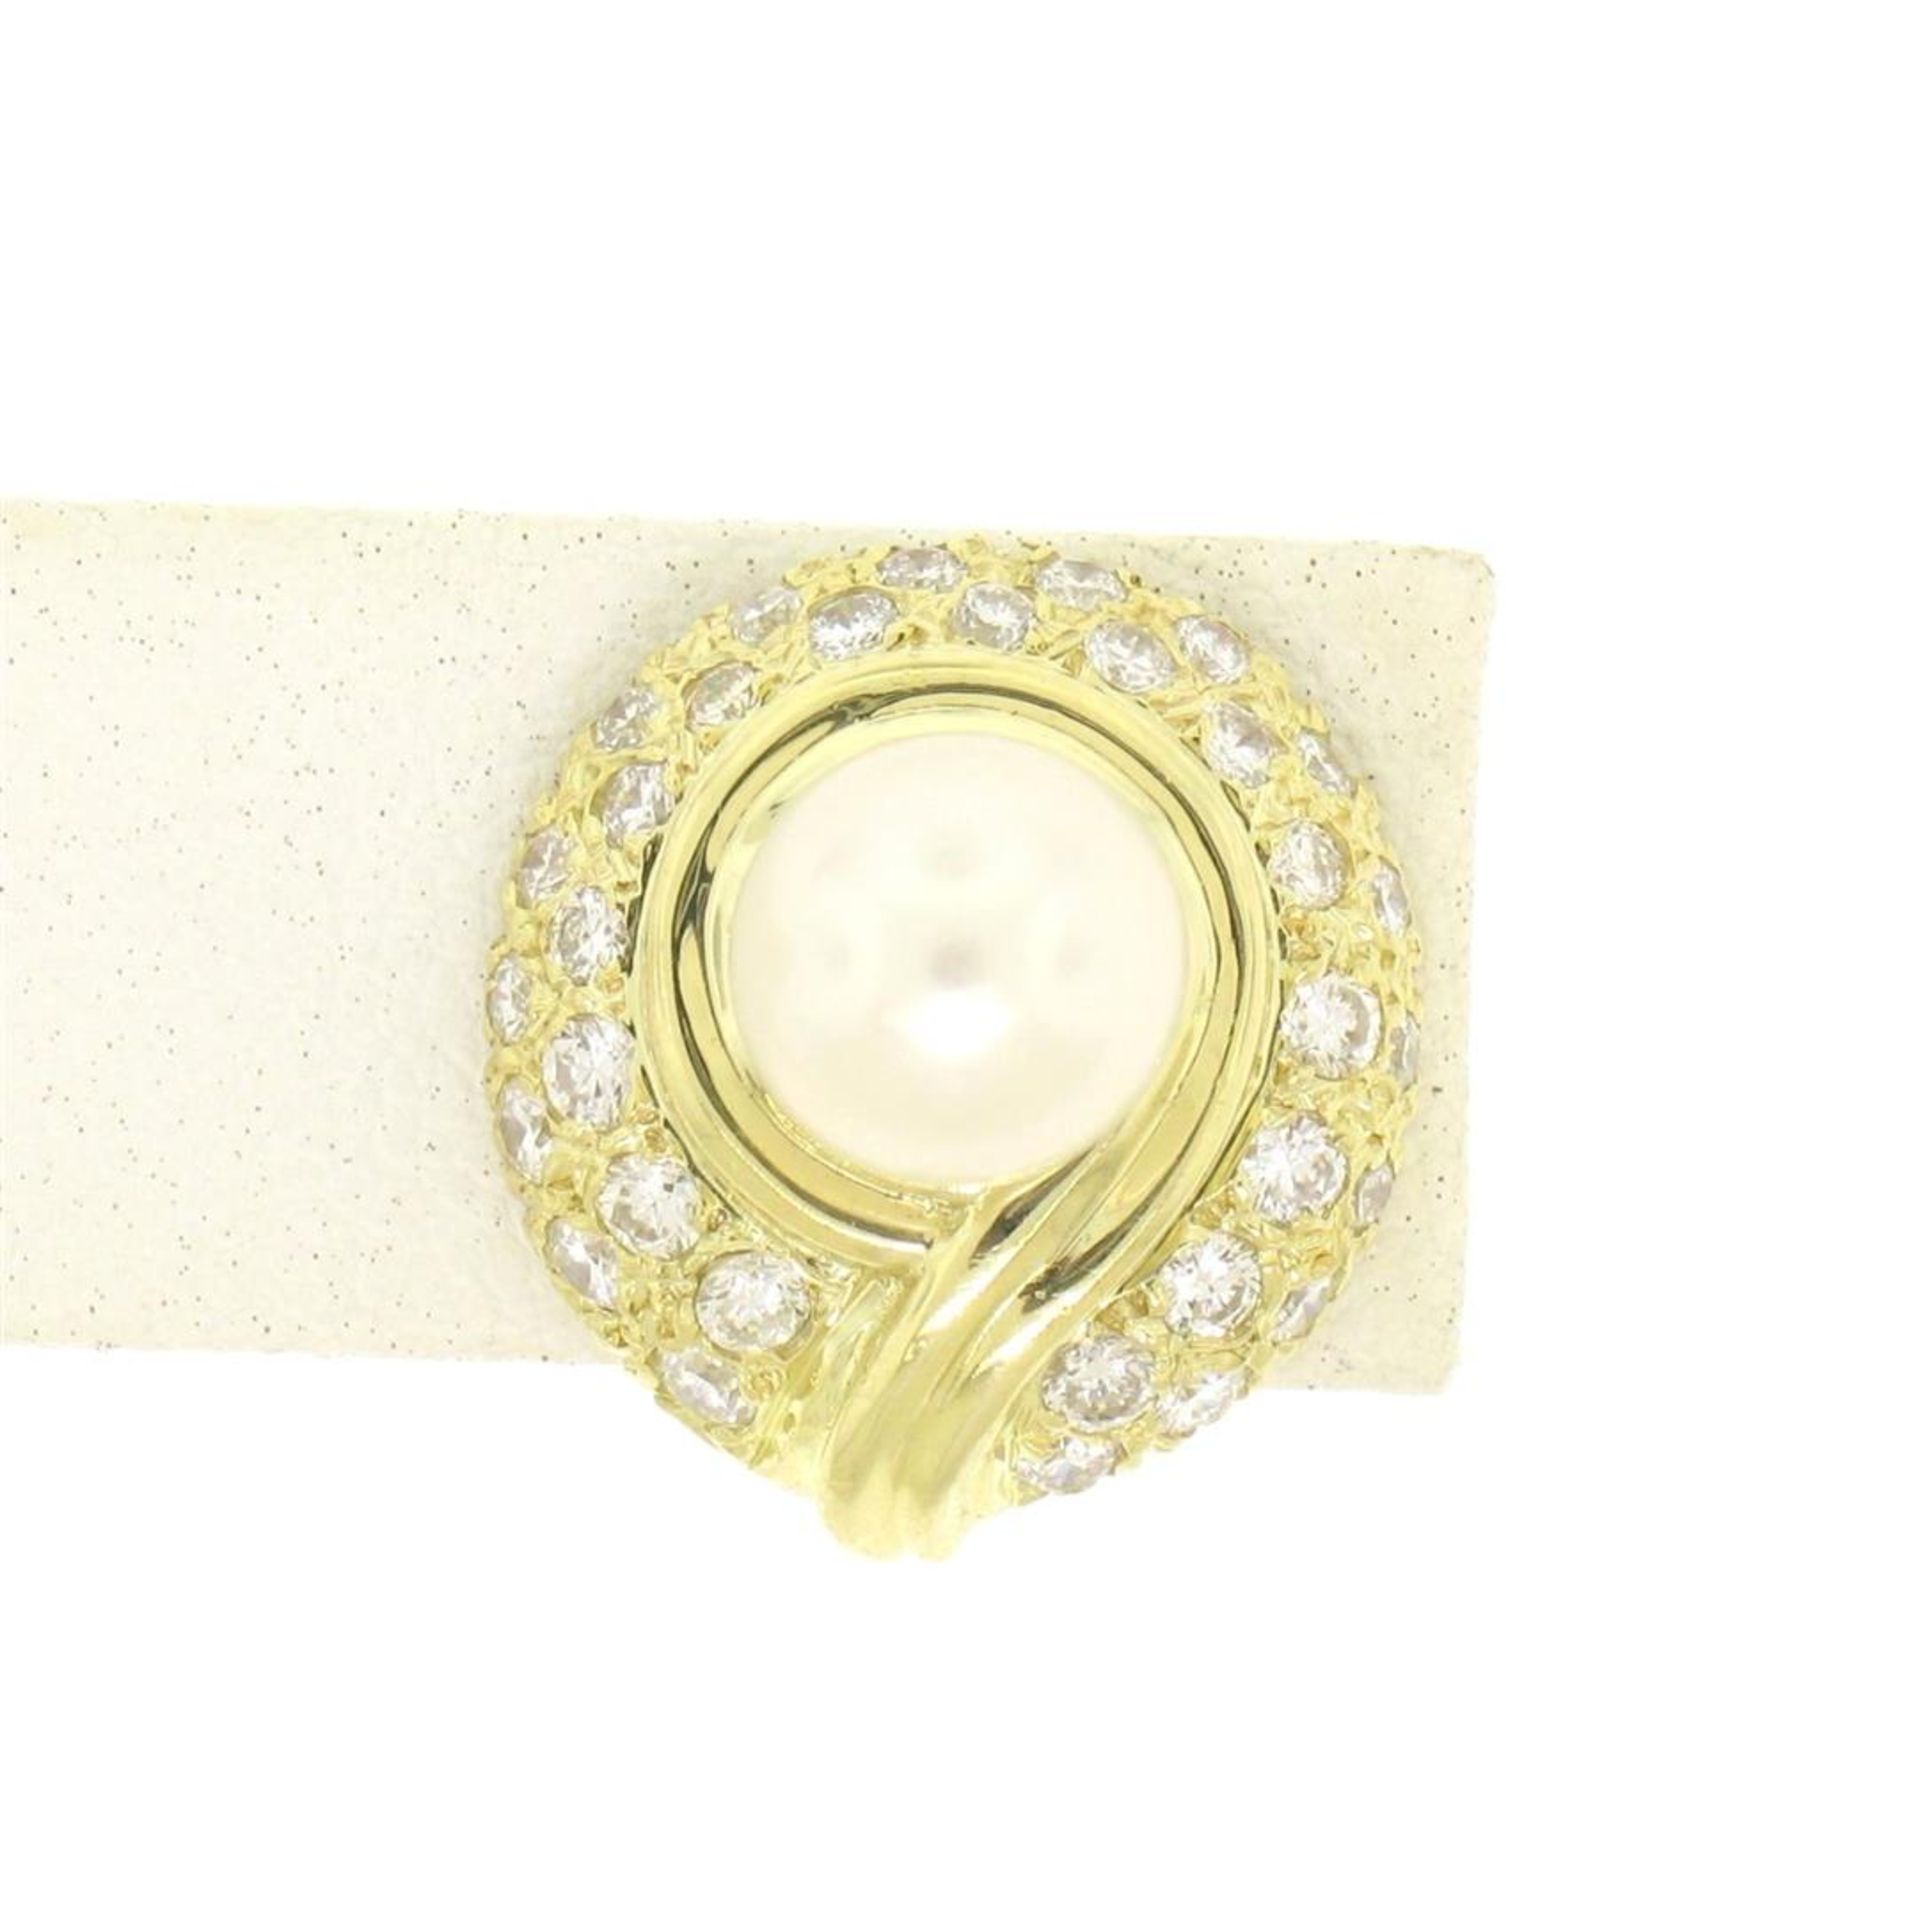 18kt Yellow Gold 1.25 ctw Cultured Pearl and Diamond Button Earrings - Image 6 of 9